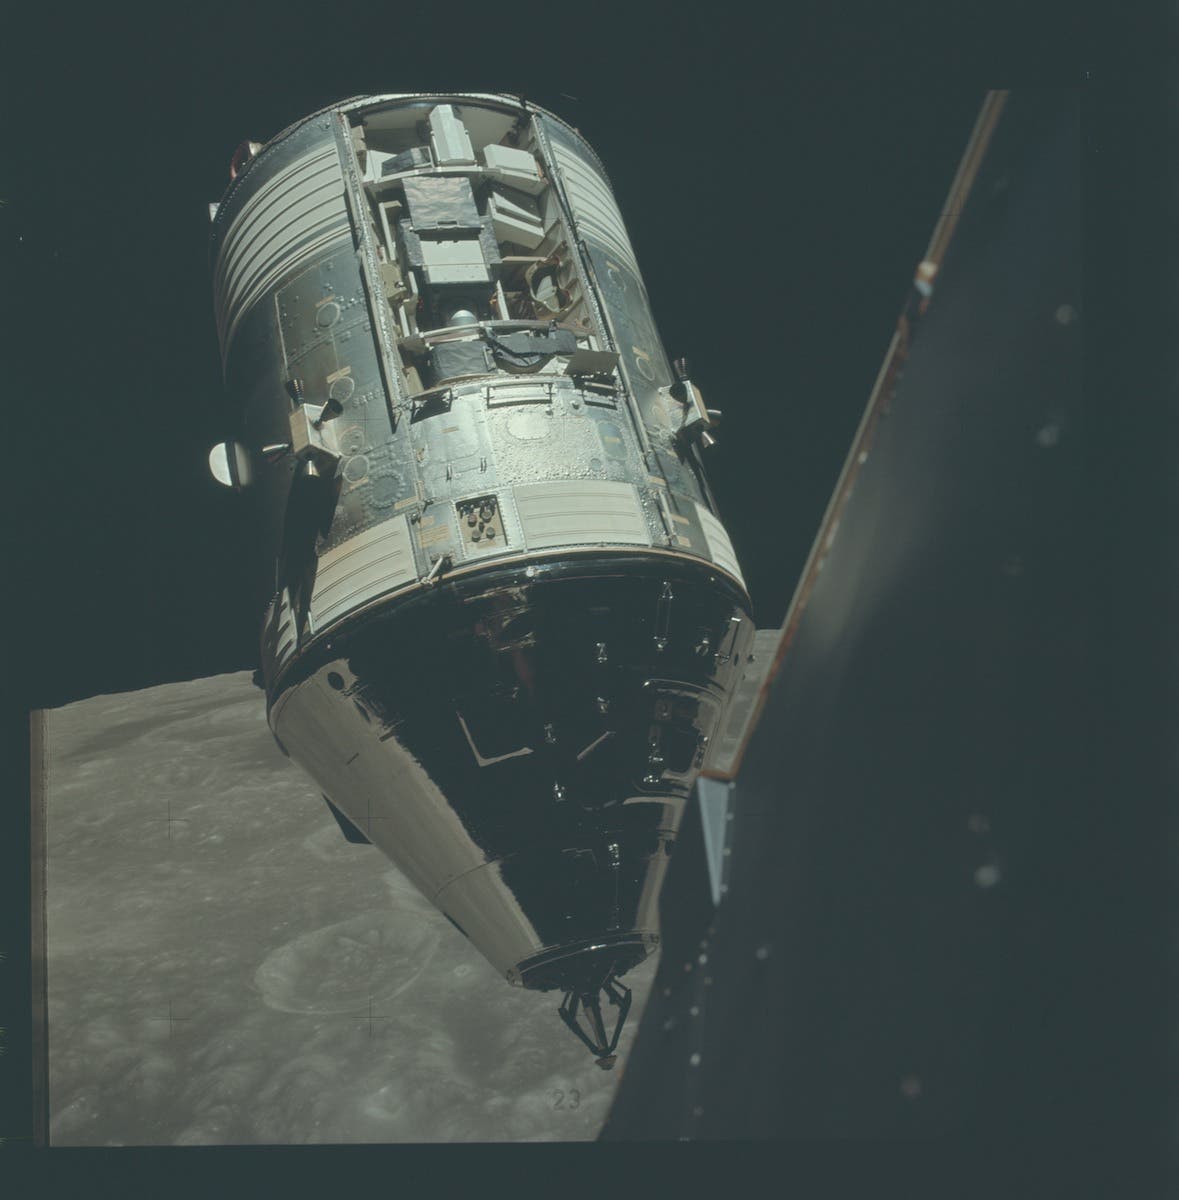 Photograph of the Apollo 17 Command Module, America, that gives a clear view of the SIM bay. The picture was taken by astronauts in the Lunar Module, Challenger, after their stay on the surface. Image source: NASA photograph AS17-145-22254.